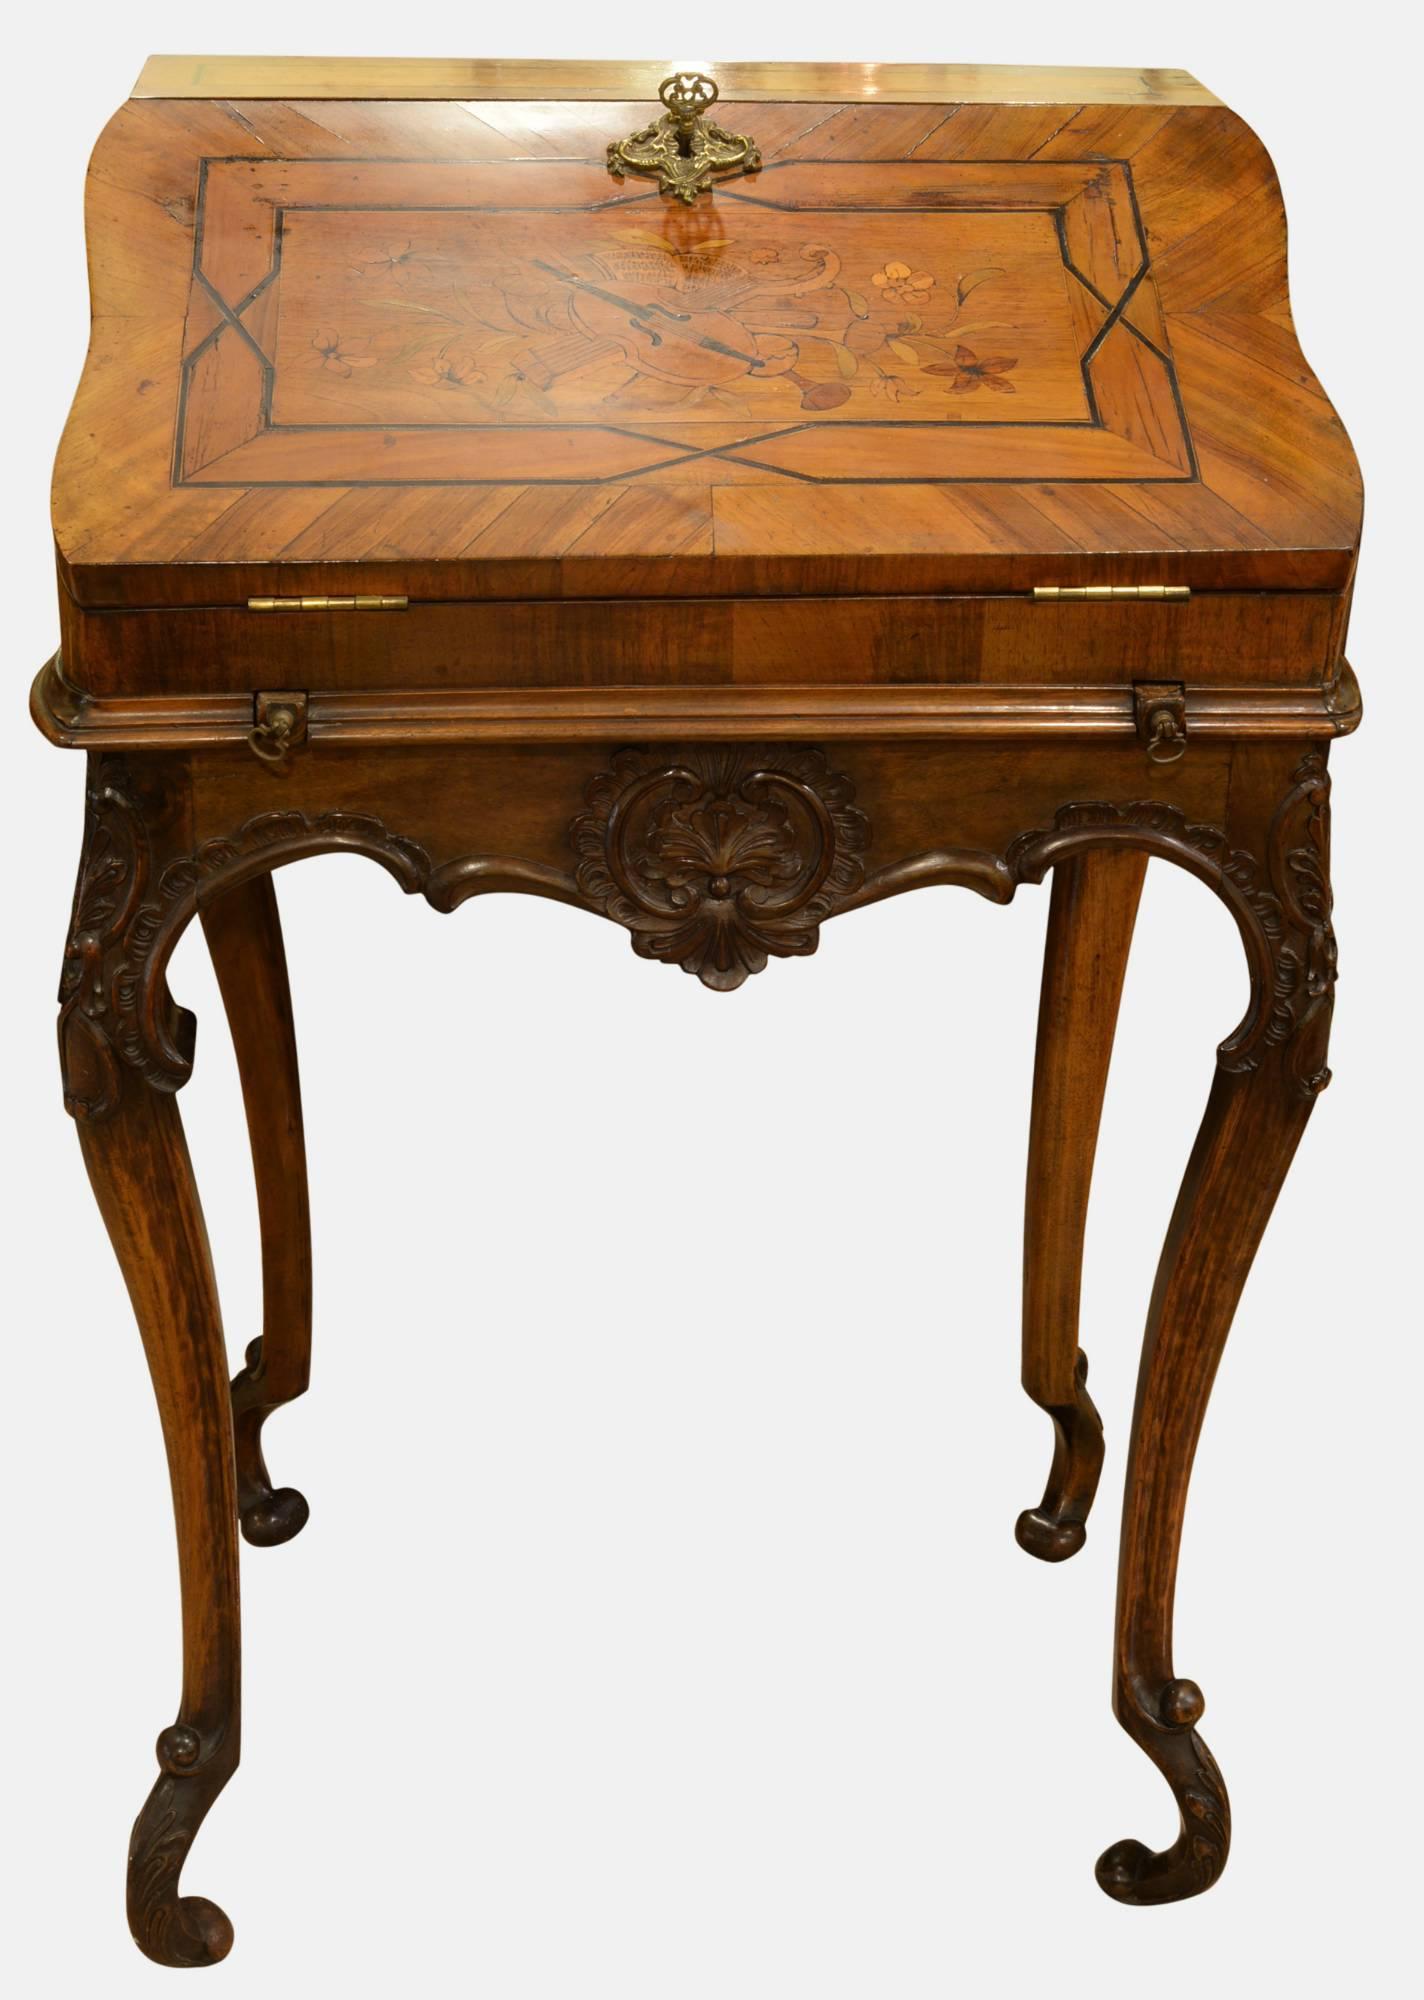 A 19th century mahogany and walnut ladies bureau with a marquetry trophy of musical instruments to the fall. Supported on shaped legs,

circa 1880.
 